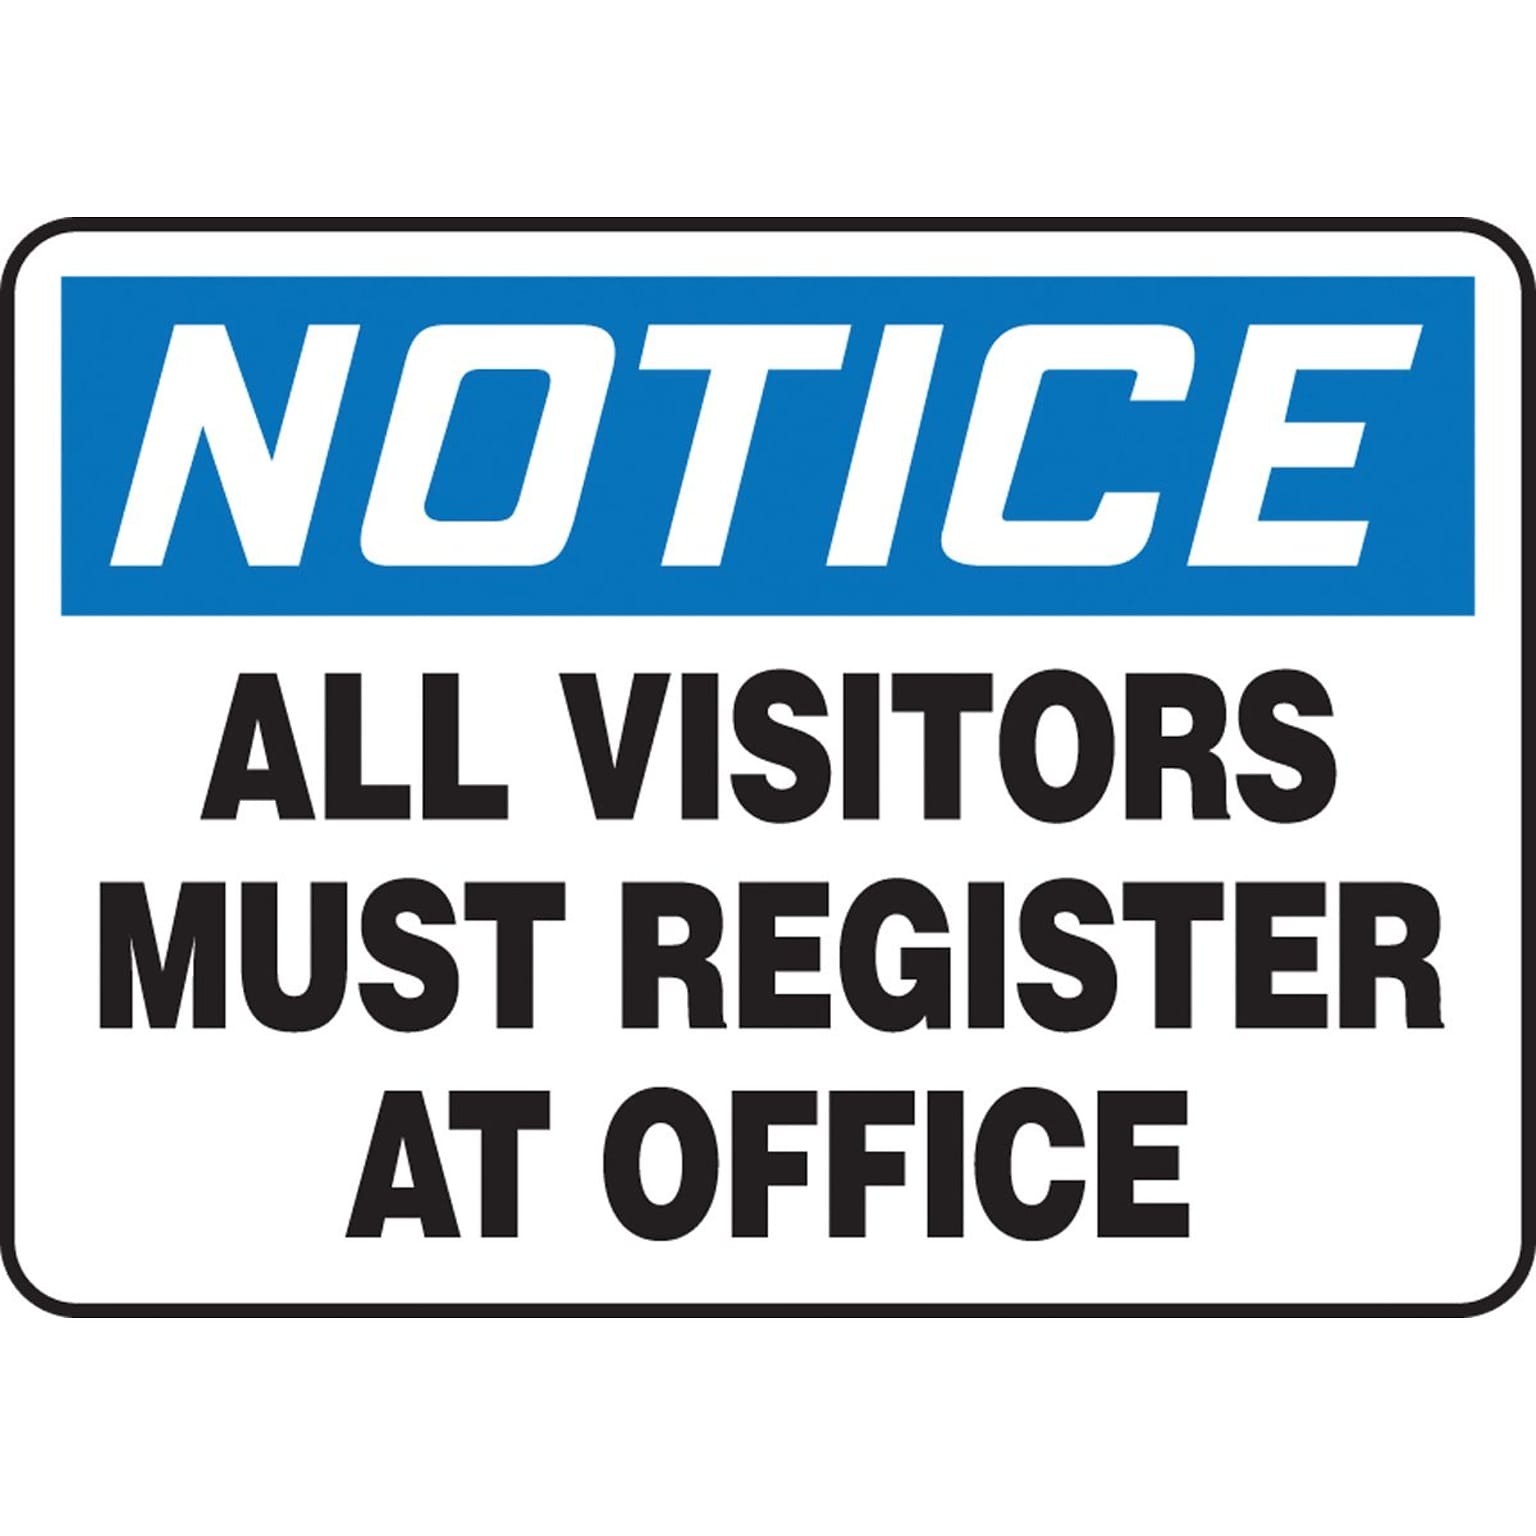 Accuform 10 x 14 Aluminum Safety Sign NOTICE ALL VISITORS MUST.., Black/Blue On White (MADM893VA)